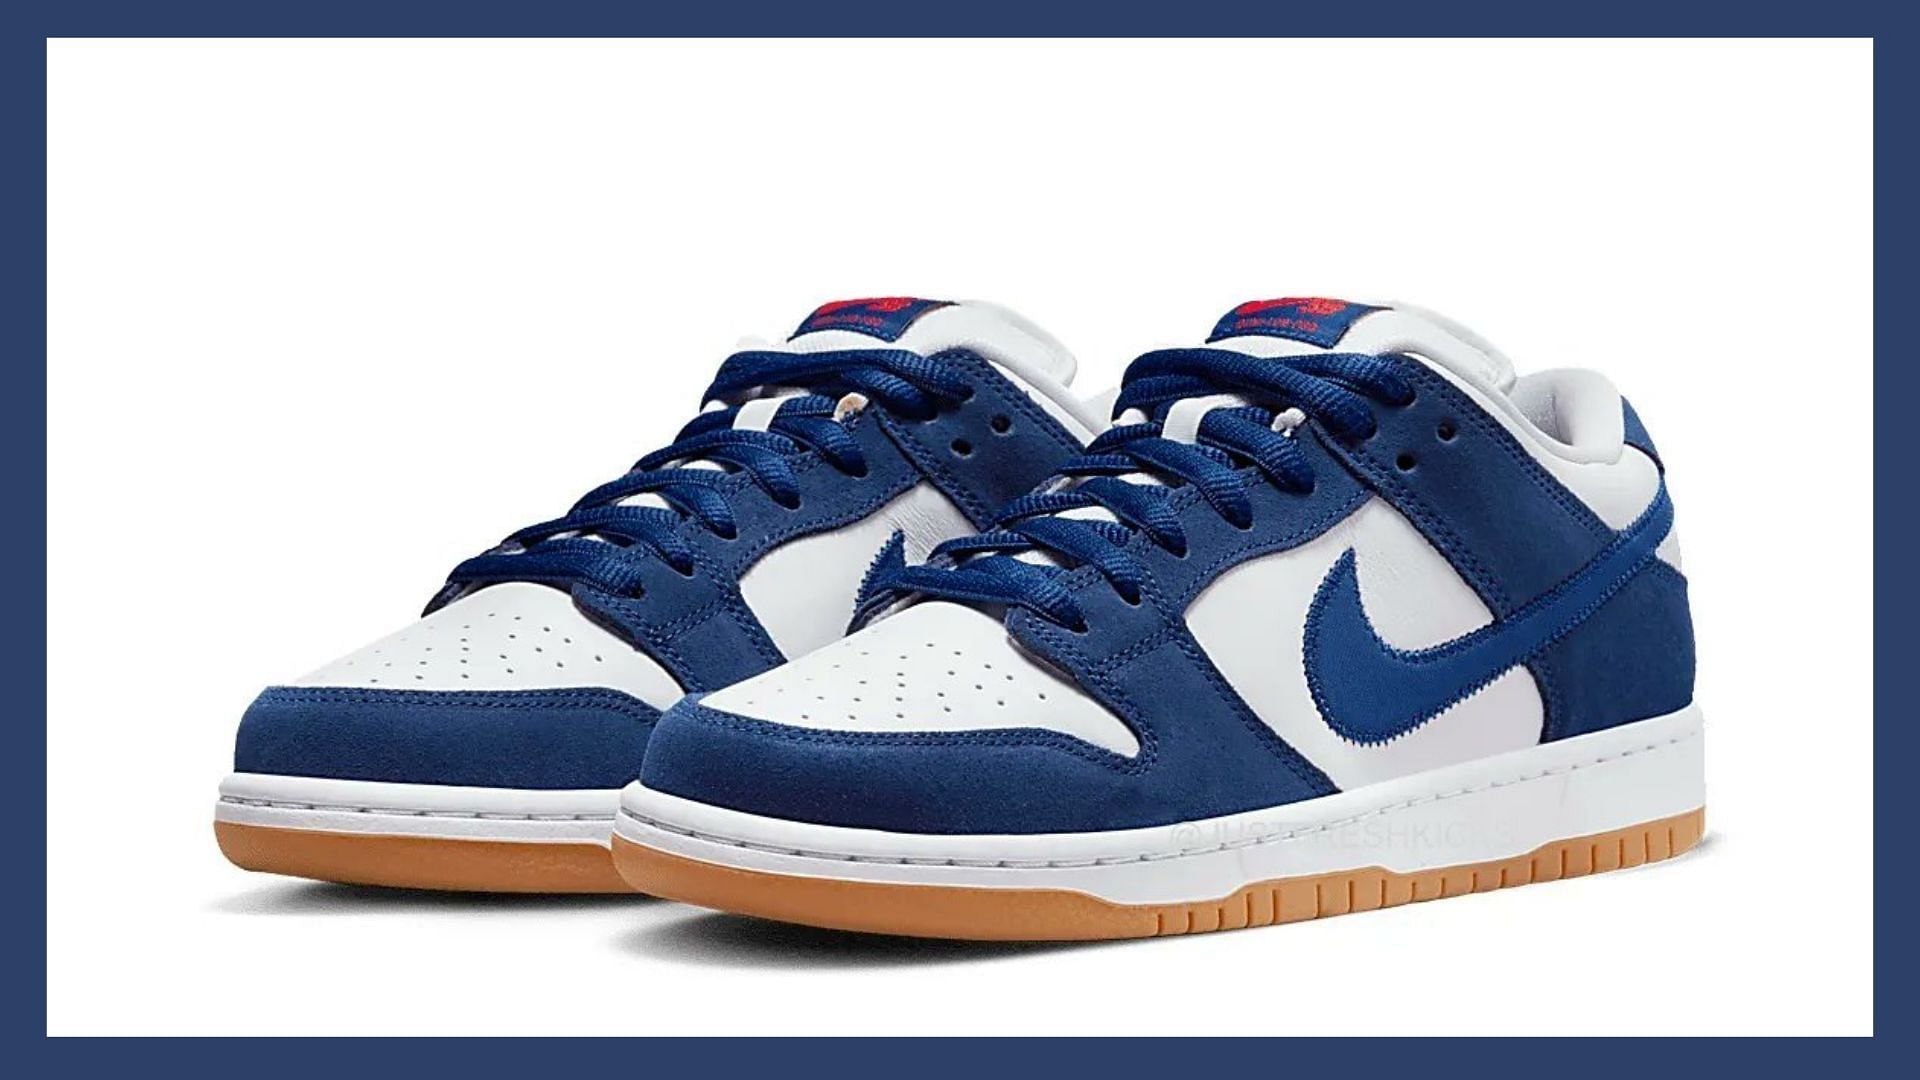 Nike SB Dunk Low Dodgers colorway will arrive in the coming weeks (Image via Nike)